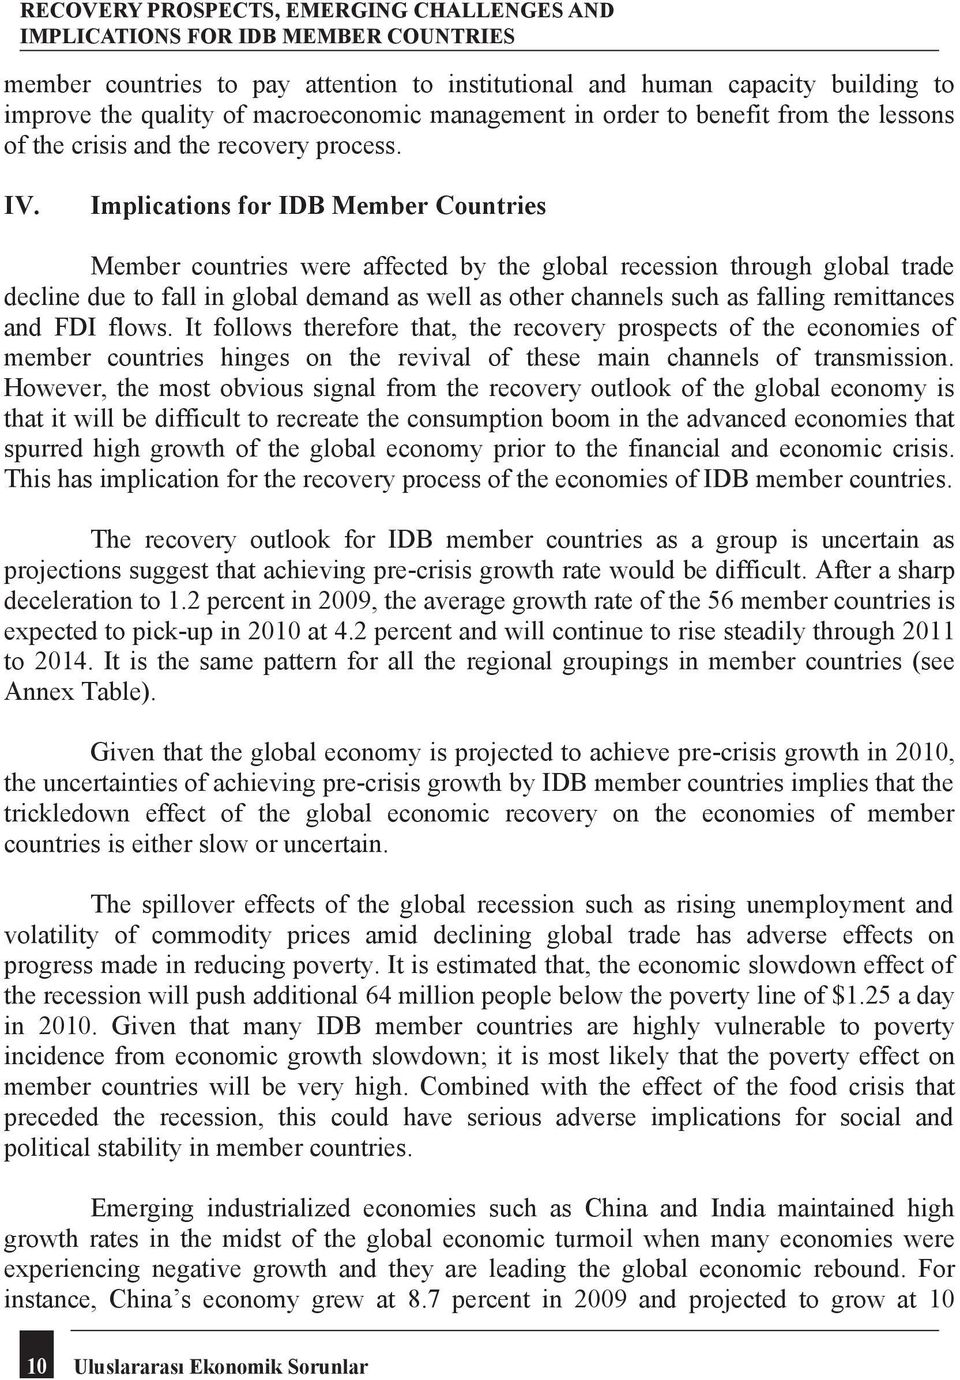 Implications for IDB Member Countries Member countries were affected by the global recession through global trade decline due to fall in global demand as well as other channels such as falling